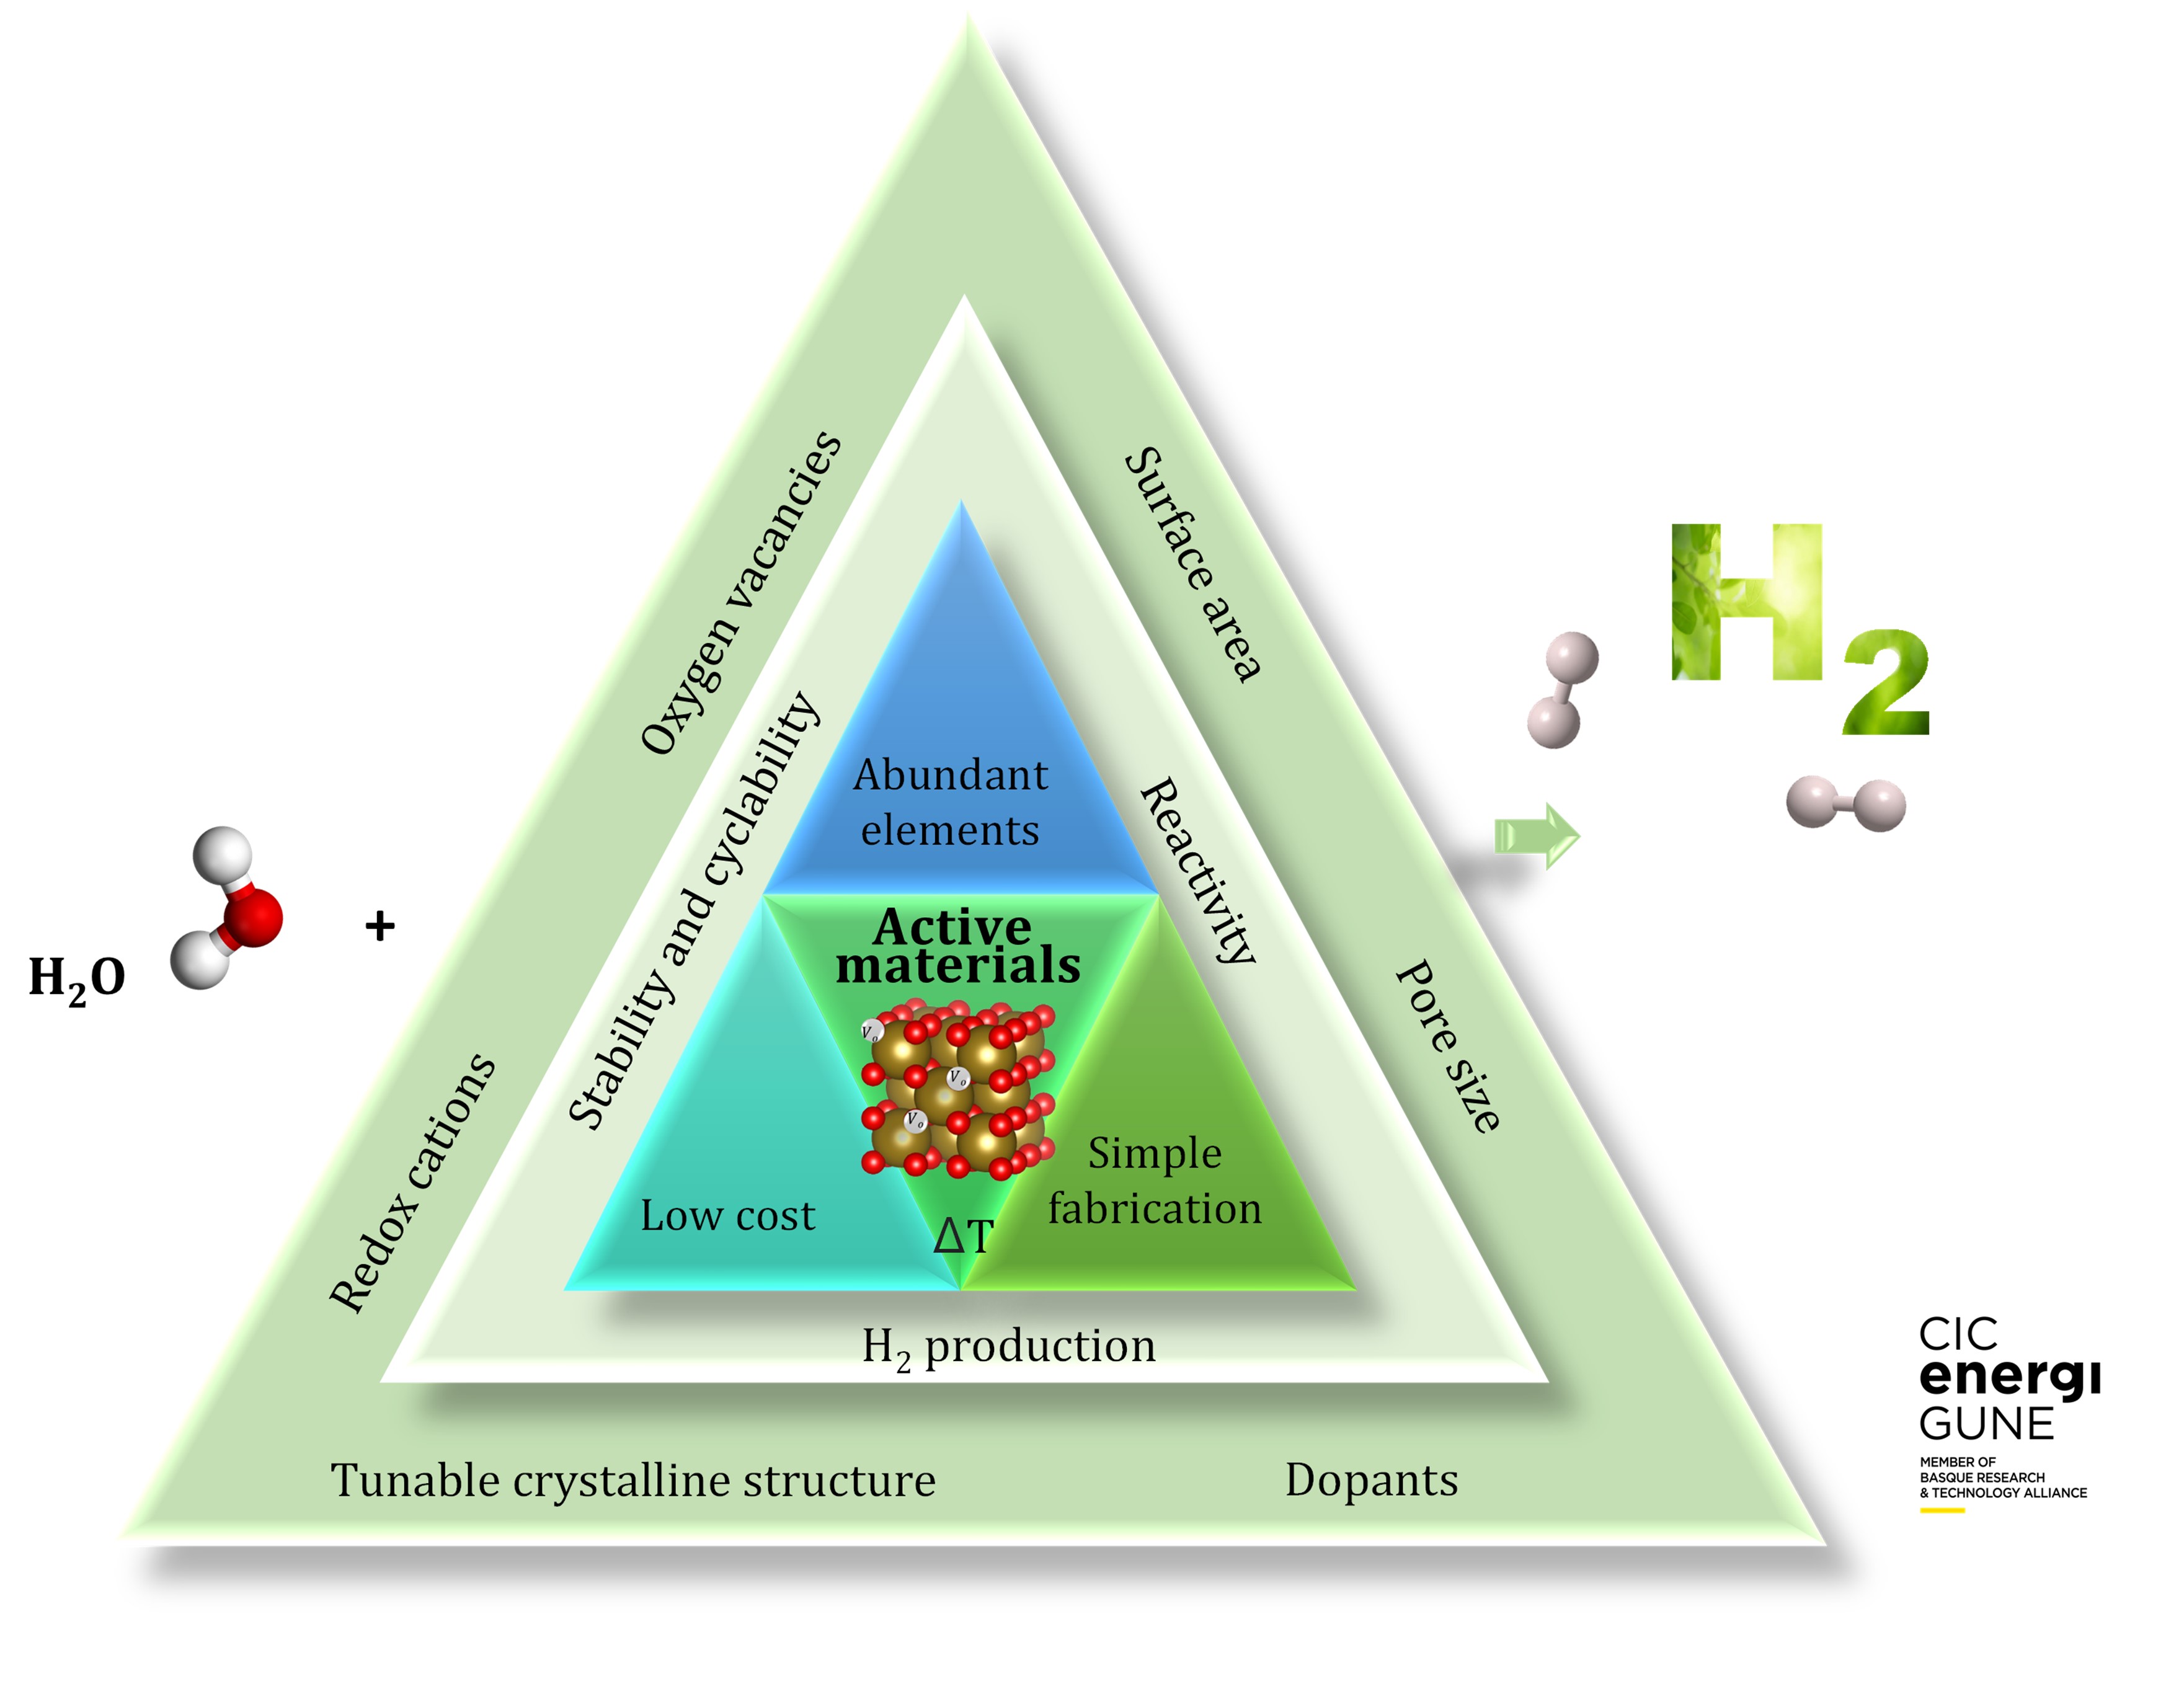 Figure 3. Factors influencing the materials performance for H2 production from thermochemical water splitting.